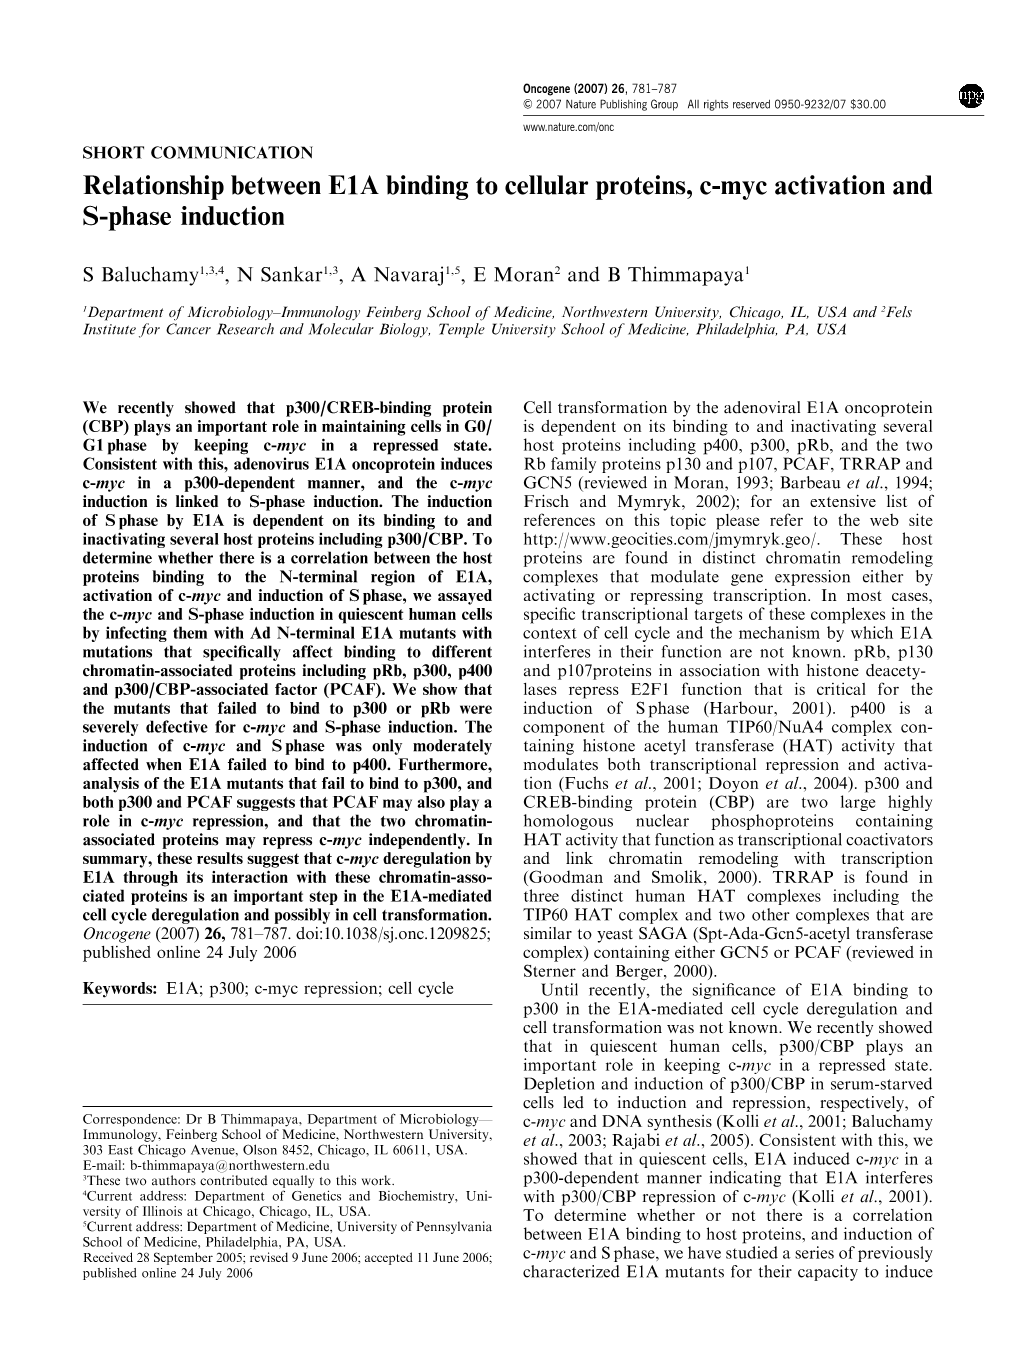 Relationship Between E1A Binding to Cellular Proteins, C-Myc Activation and S-Phase Induction